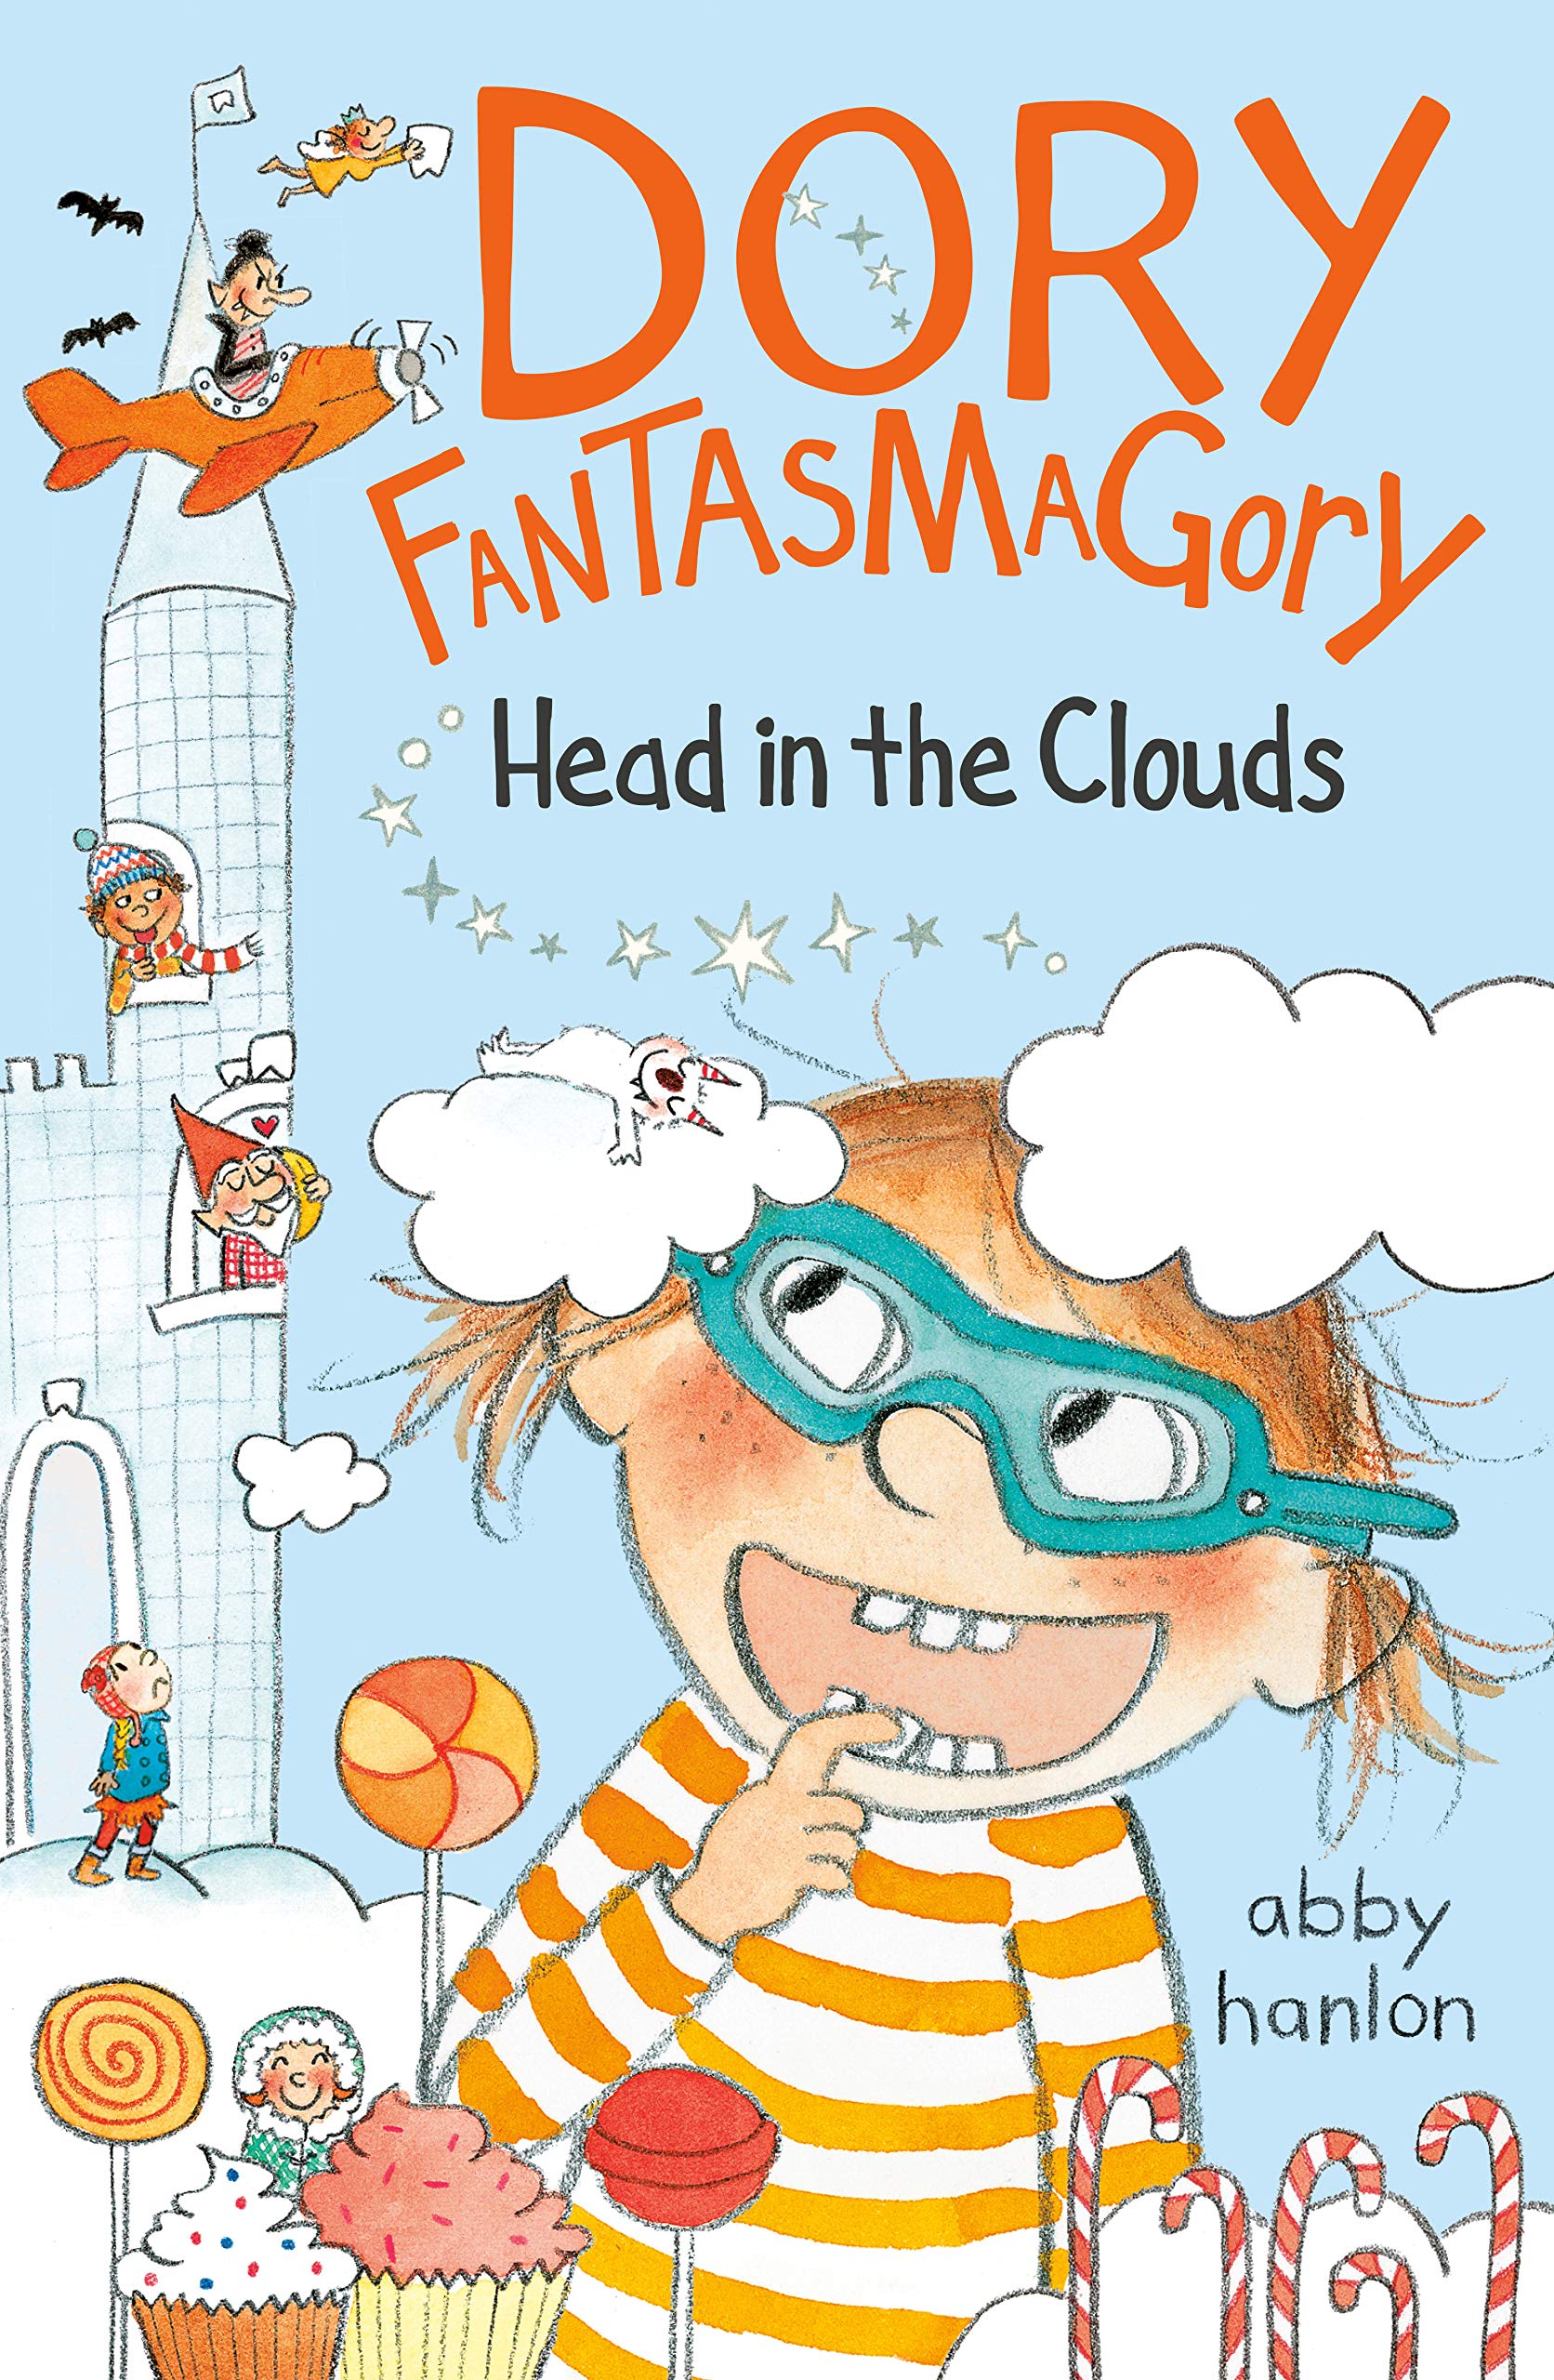 Dory Fantasmagory(4): Head in the Clouds